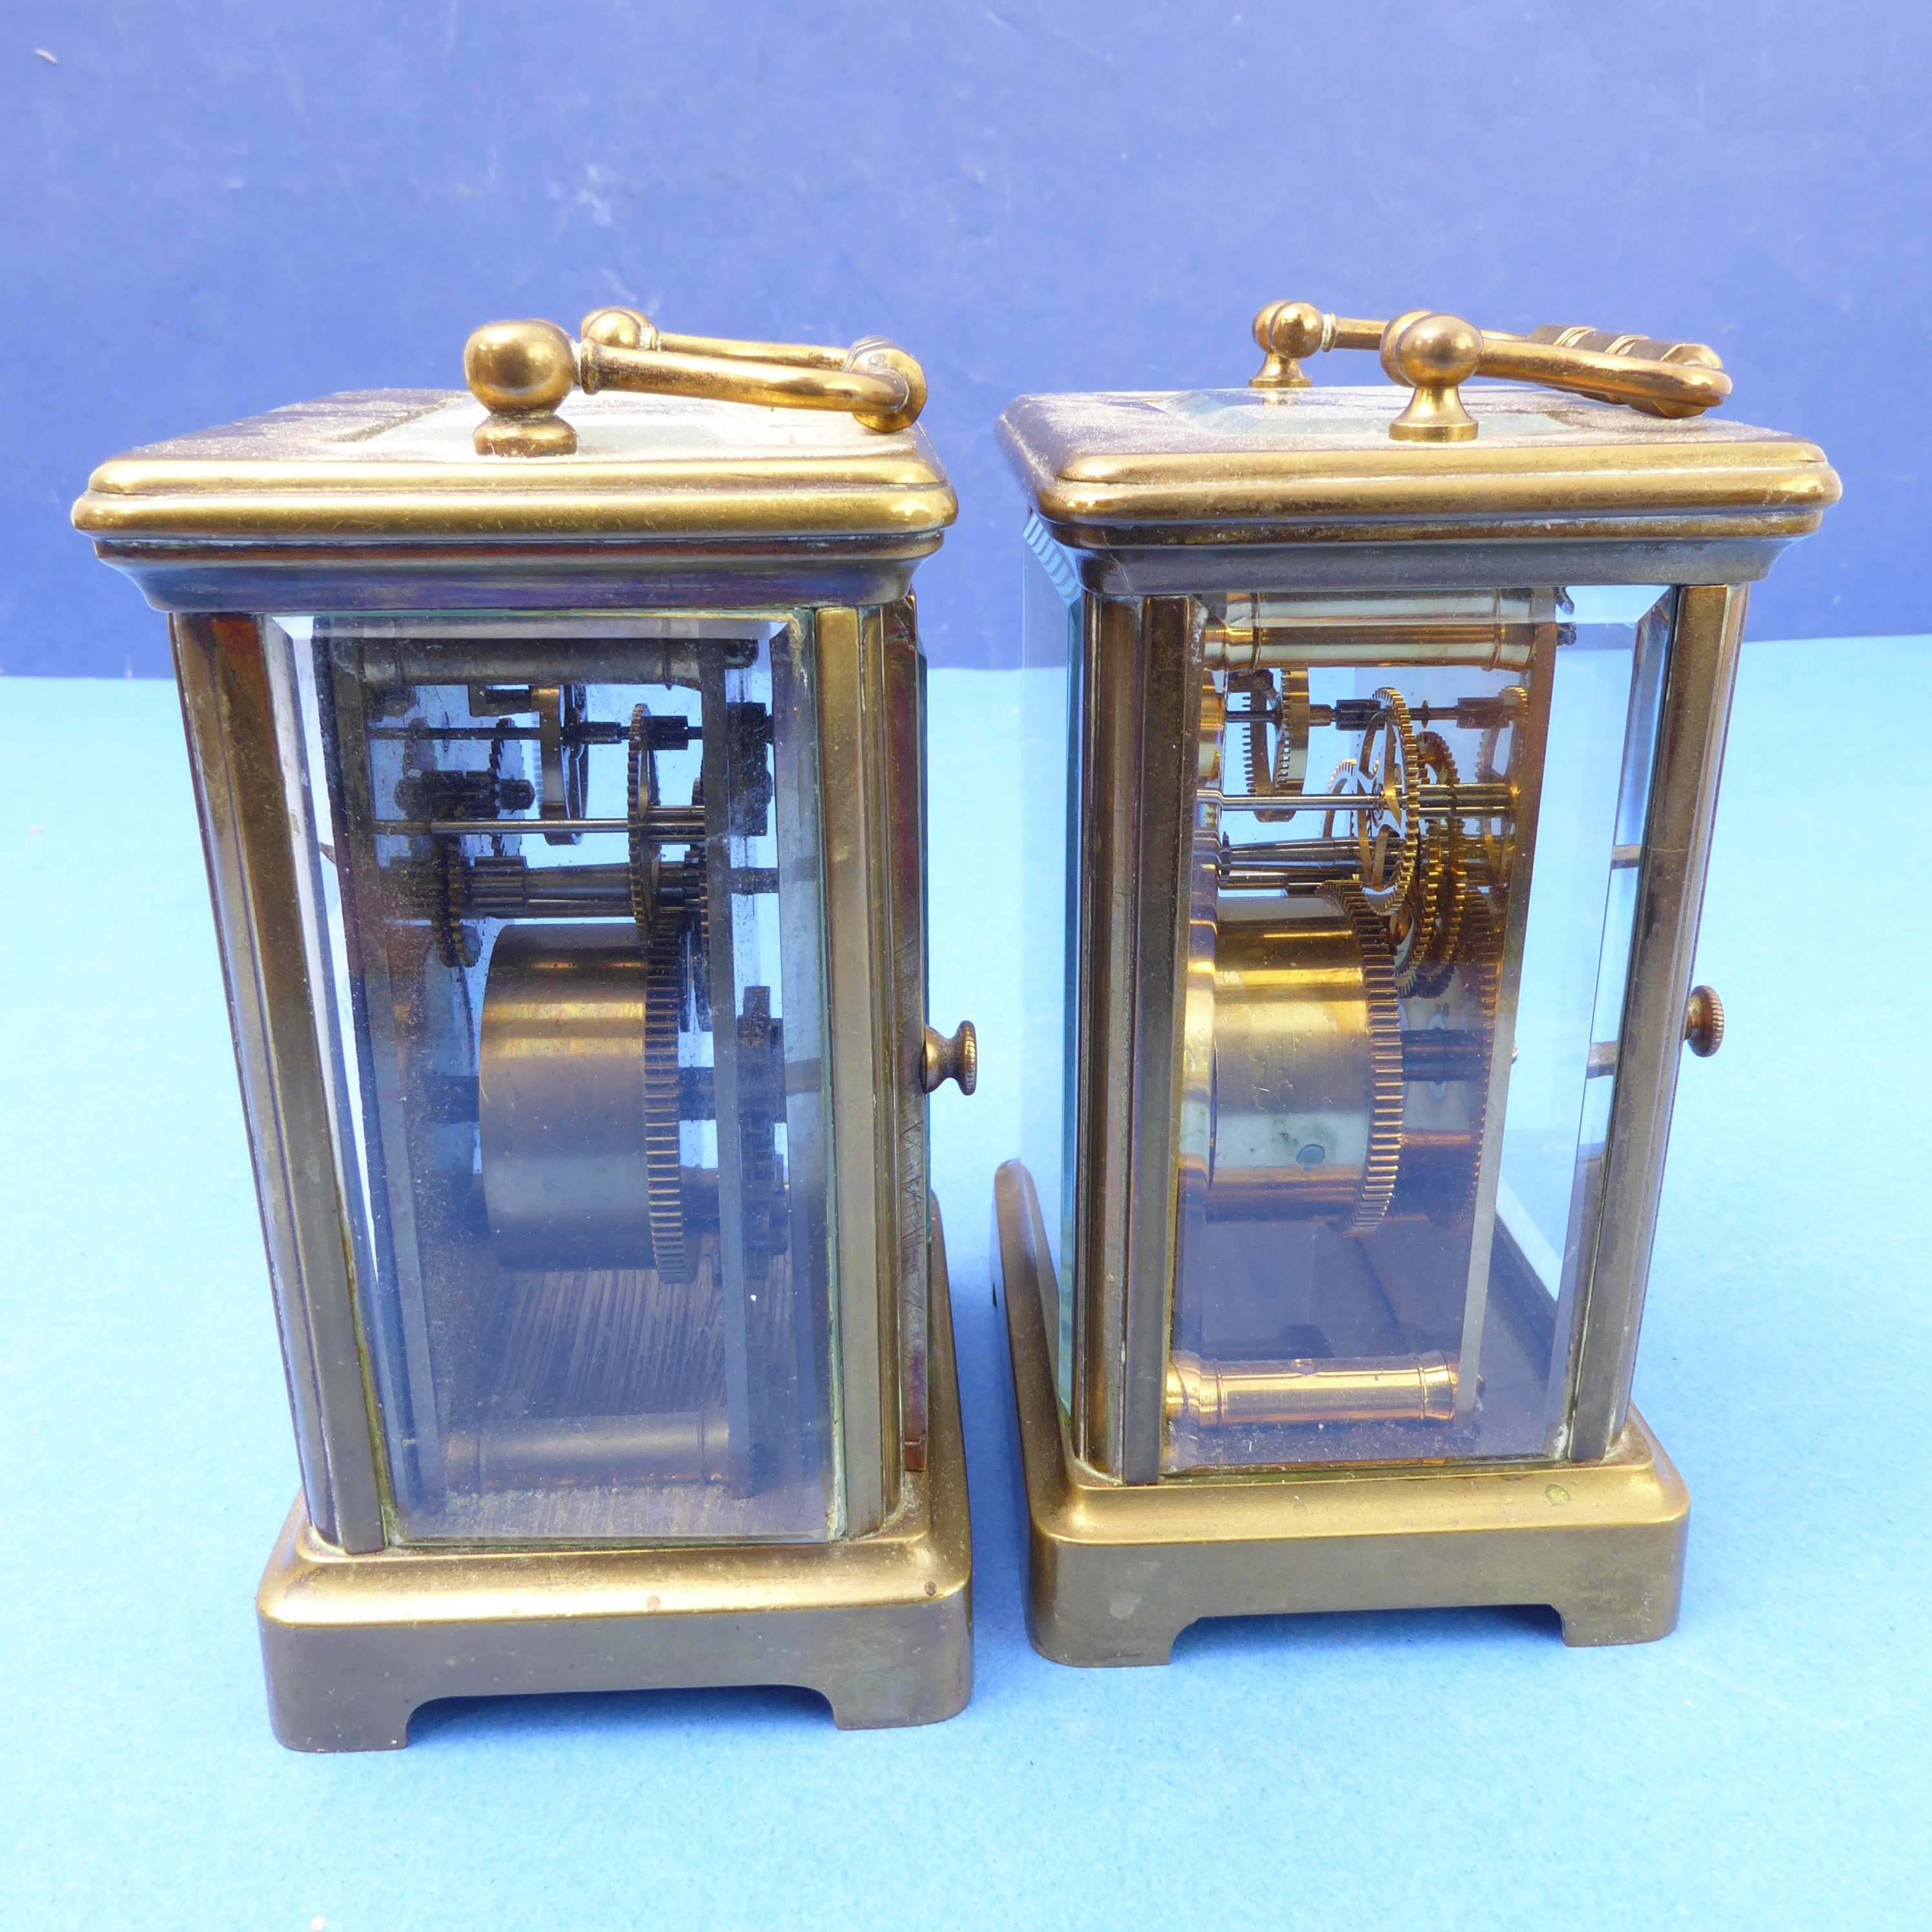 Two very similar 20th century brass carriage clocks each with white enamel dial with Roman numerals, - Image 6 of 8